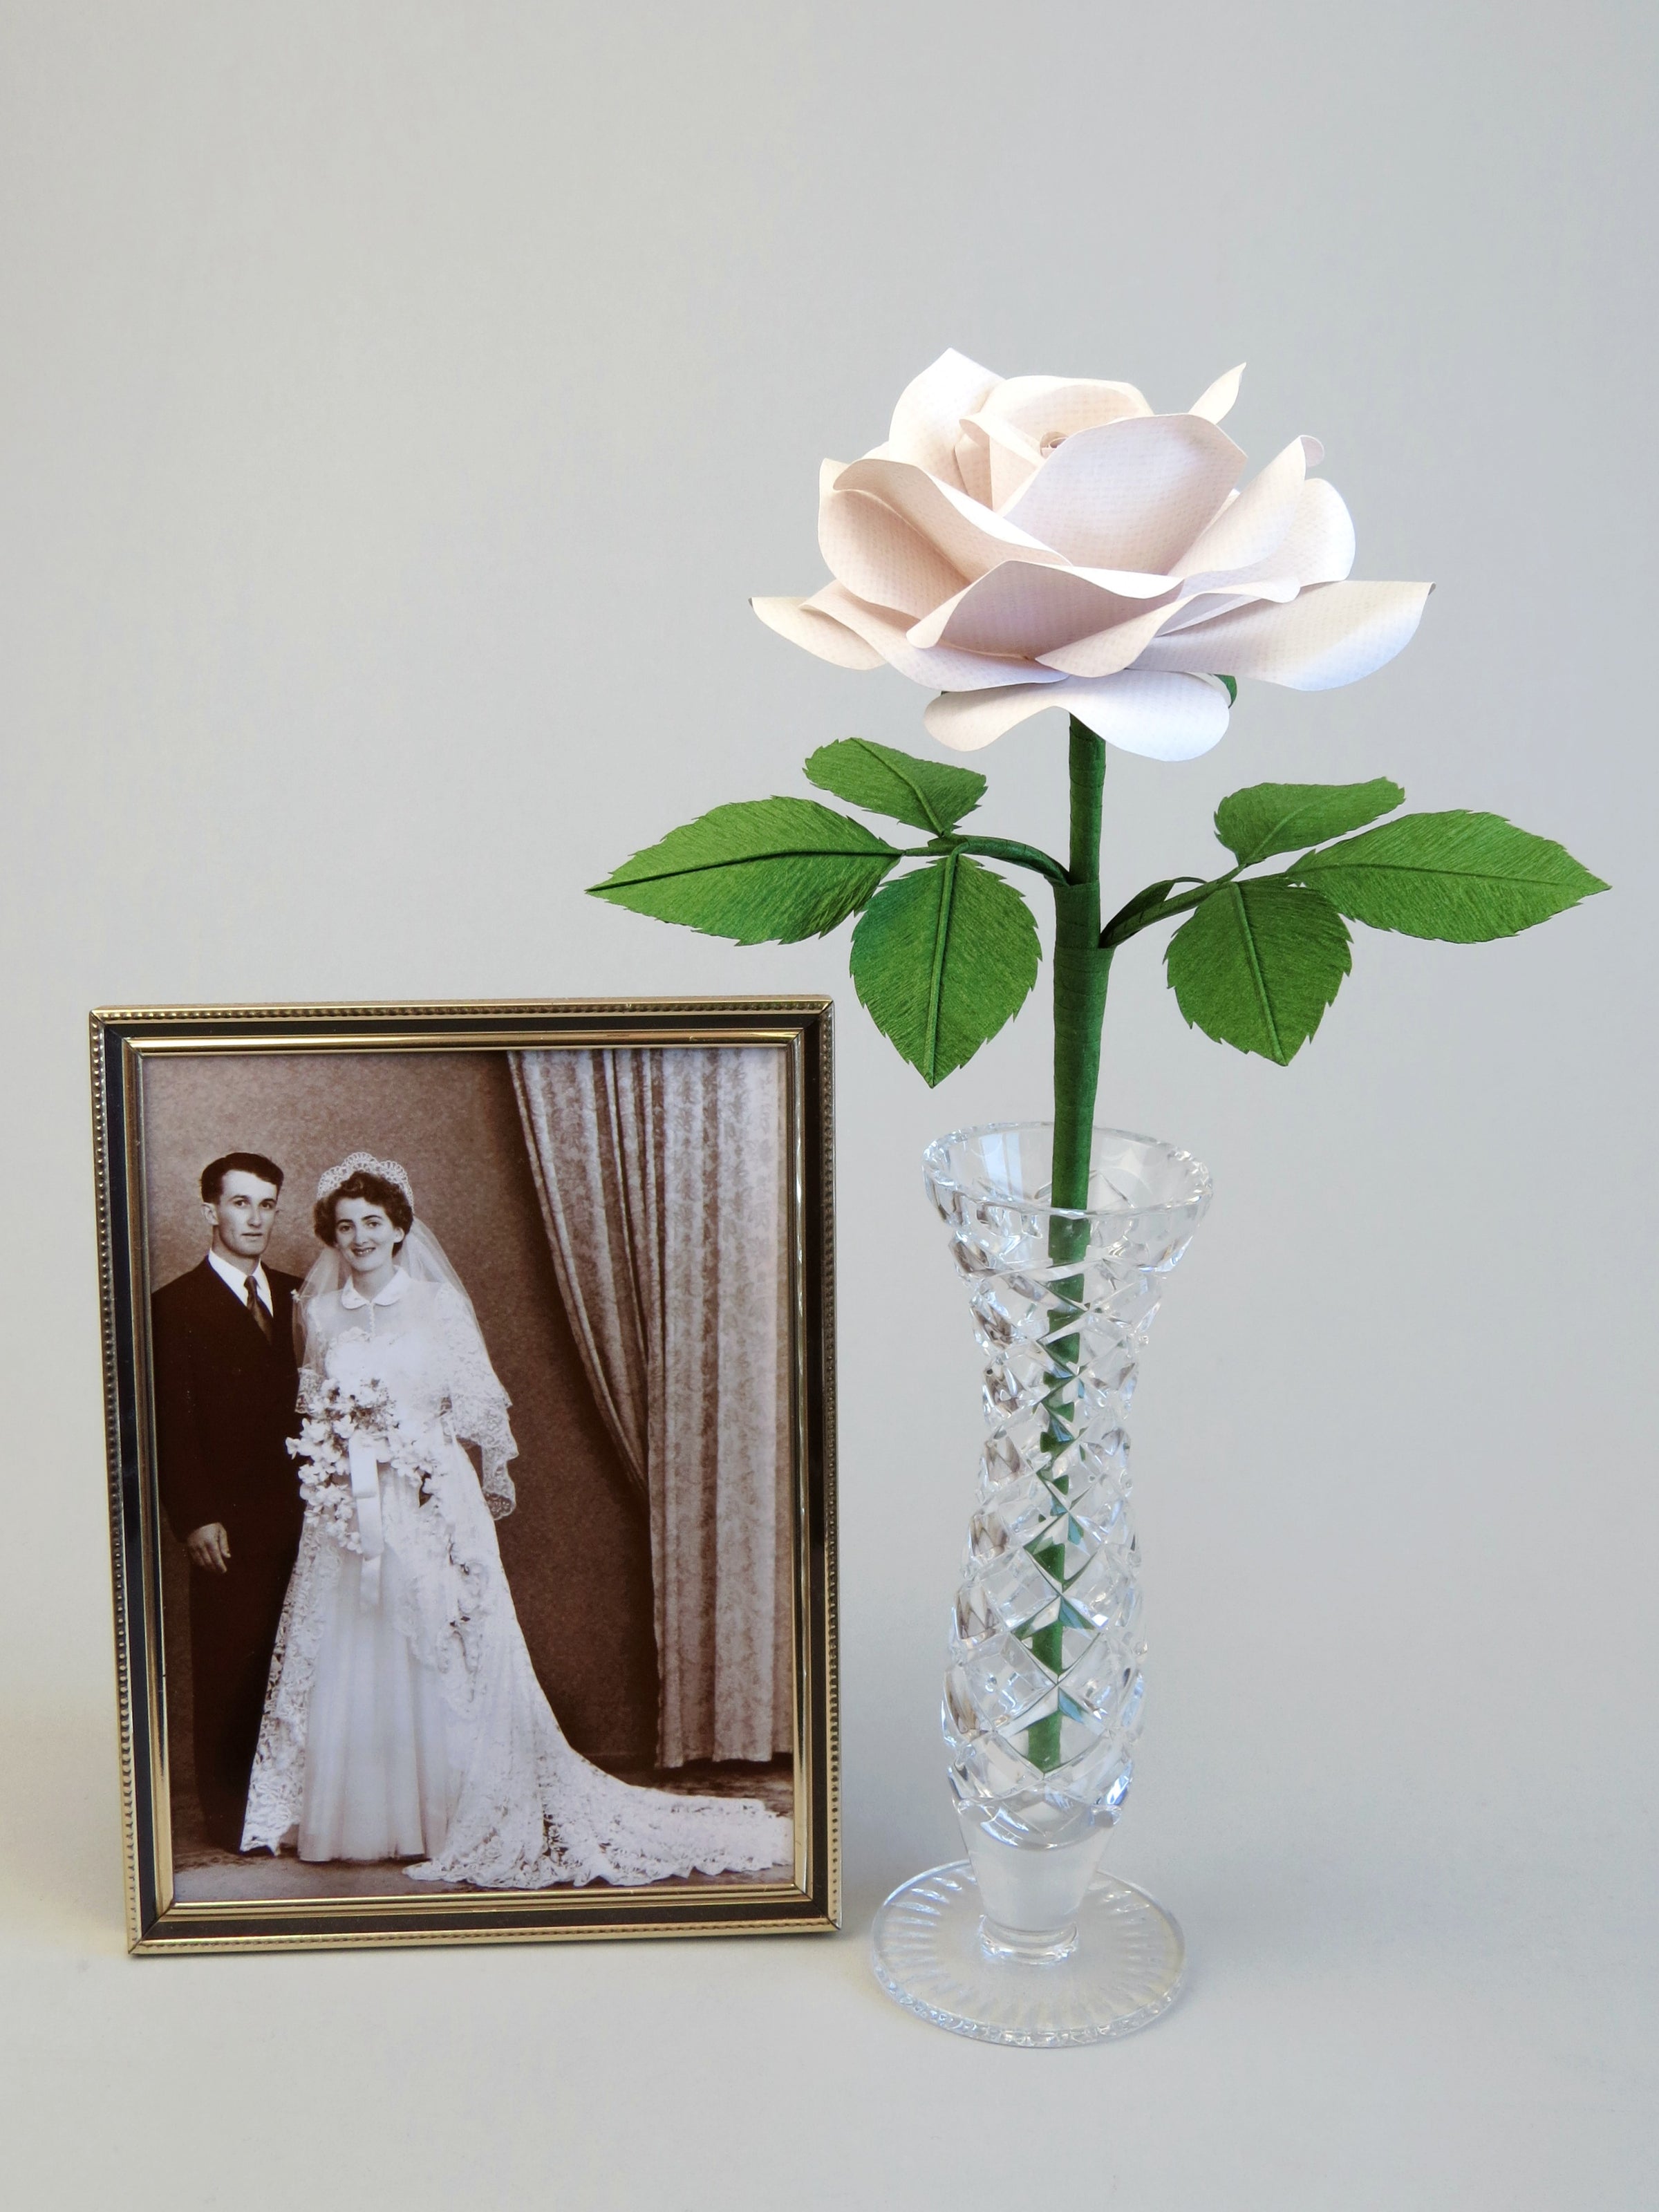 White linen paper rose with six green leaves standing in a slender glass vase with an old framed sepia wedding photo standing beside it